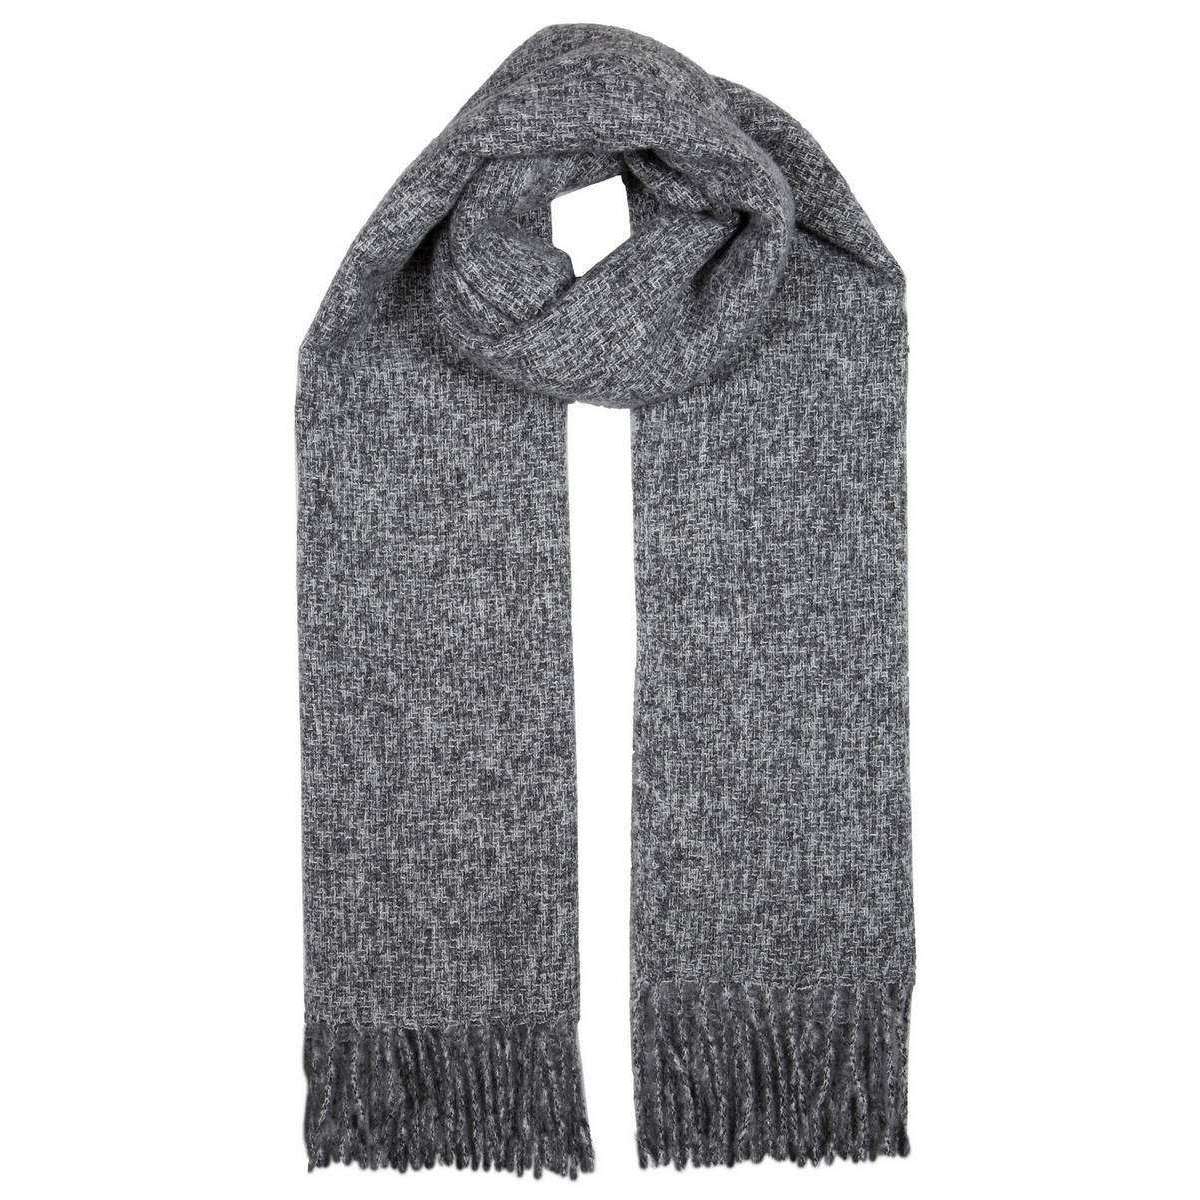 Dents Tweed Stole Scarf - Charcoal